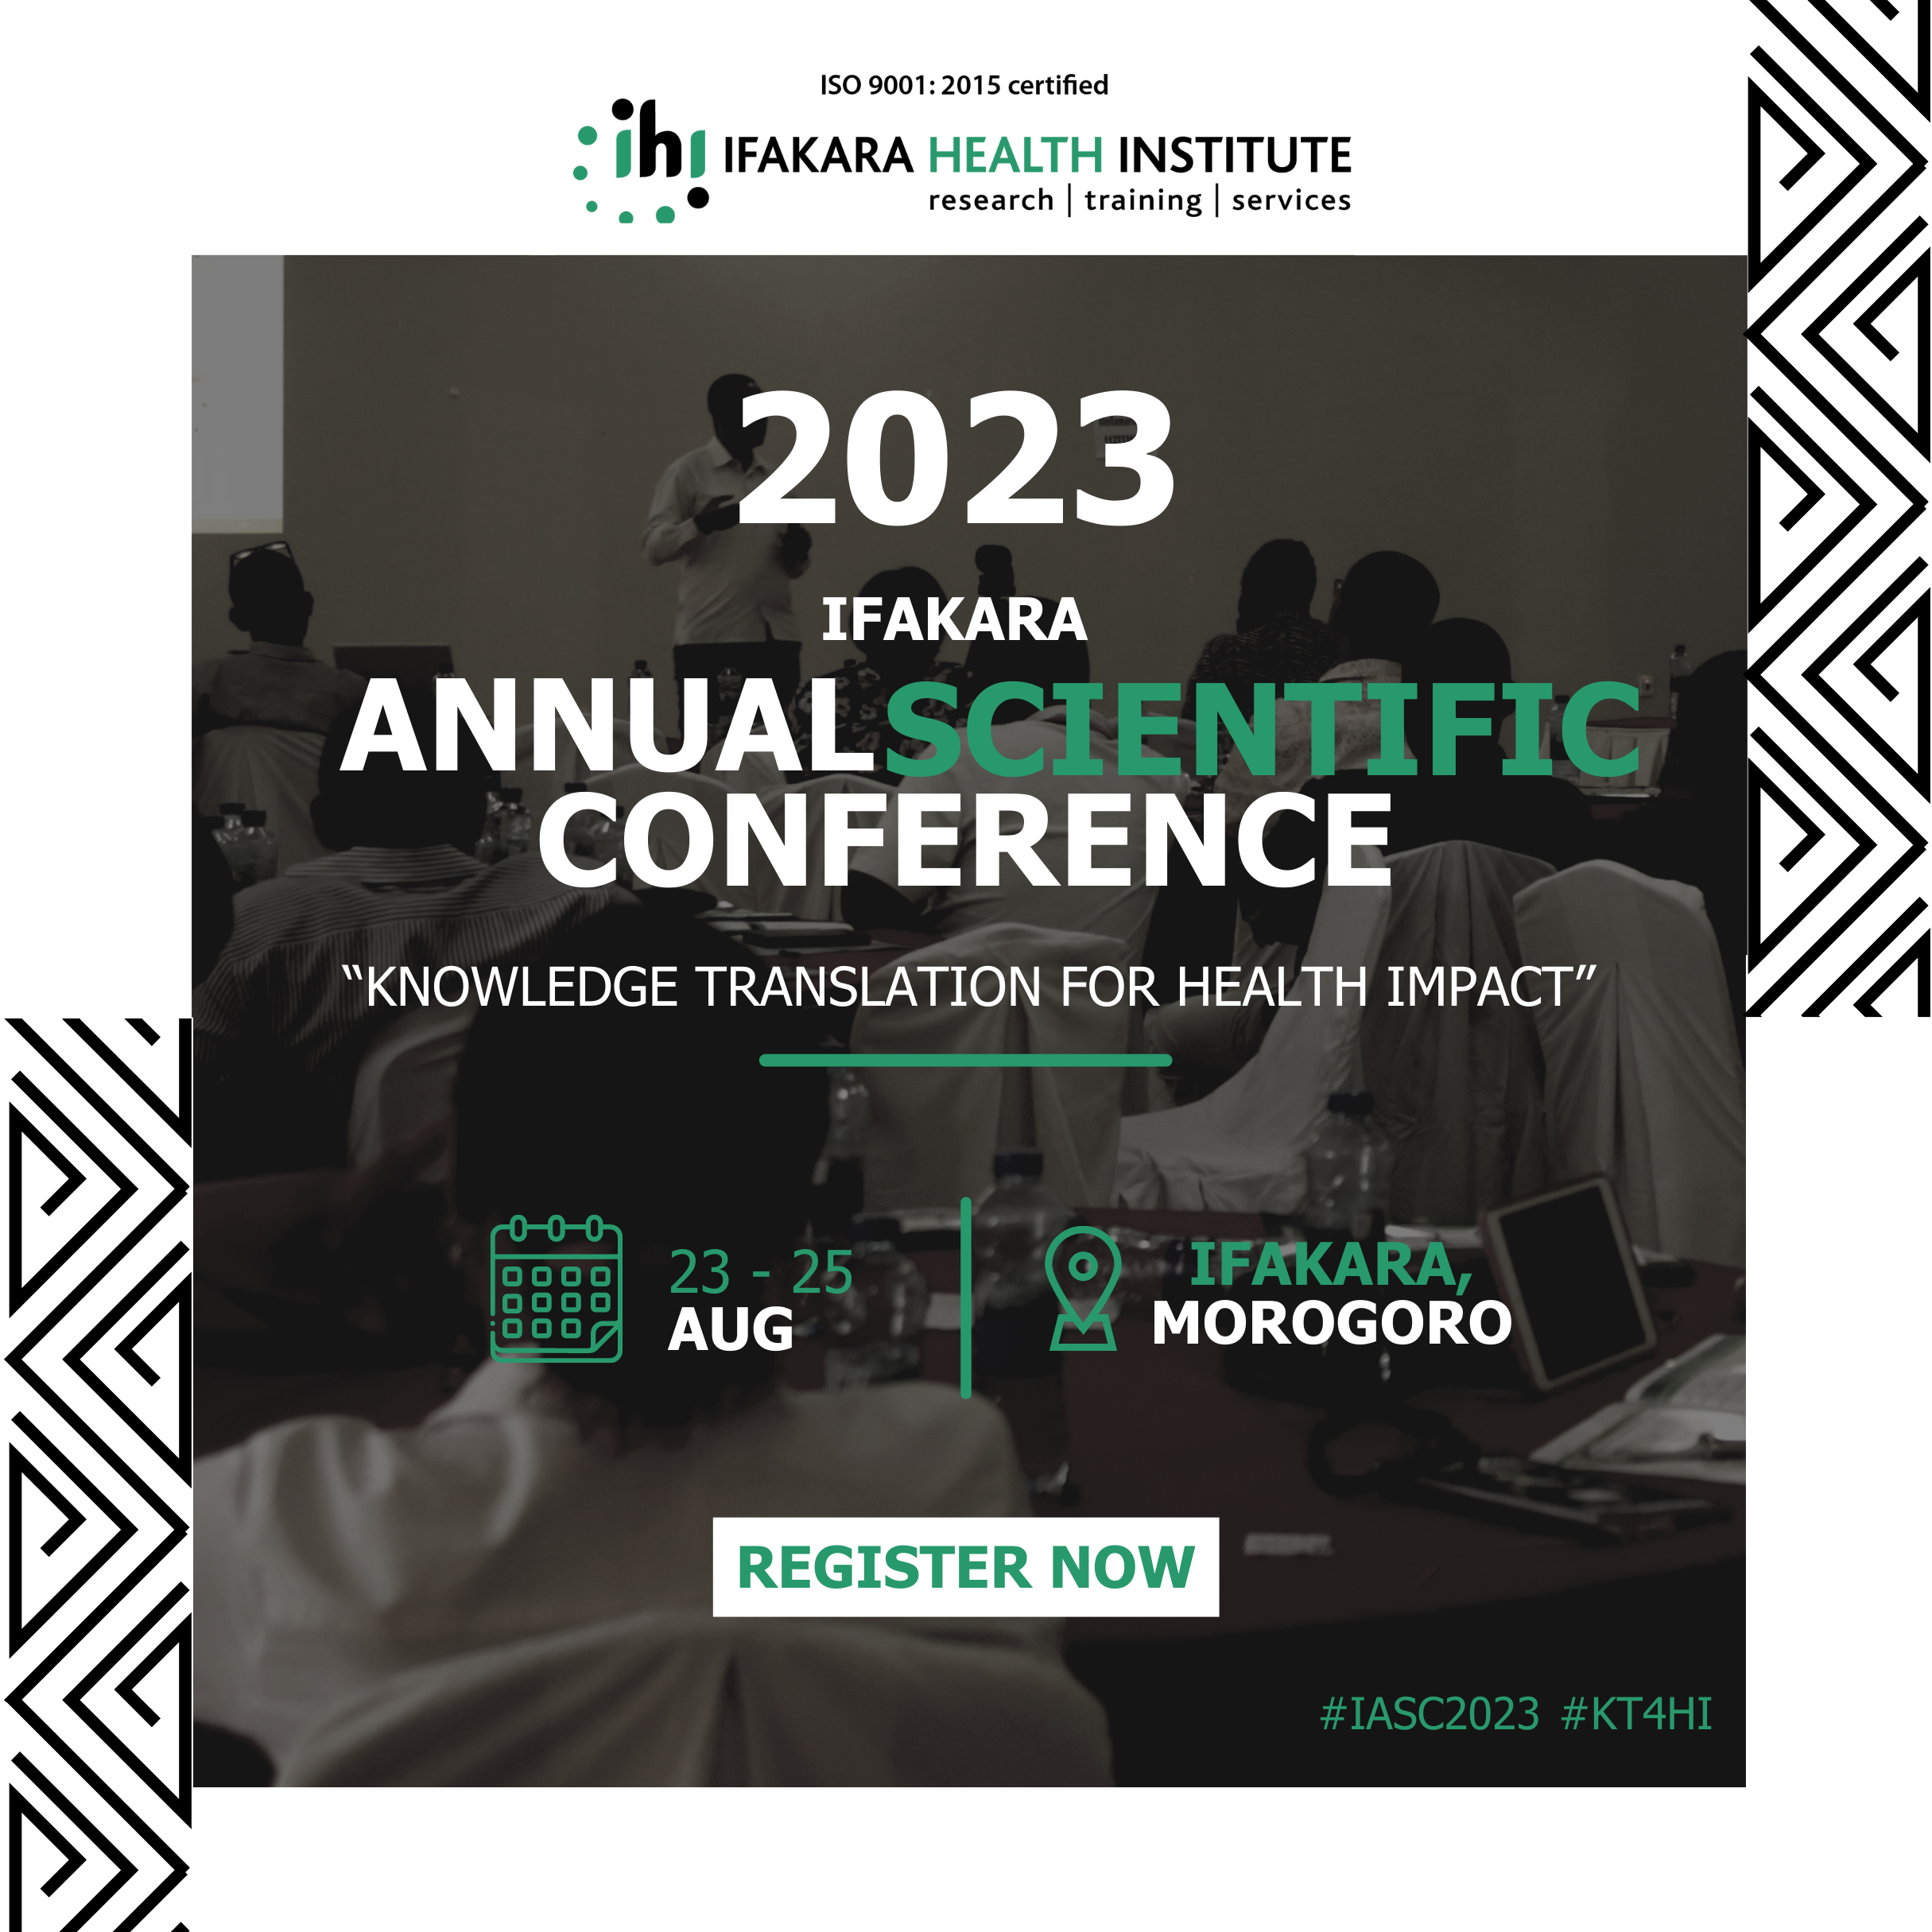 The Ifakara Annual Scientific Conference